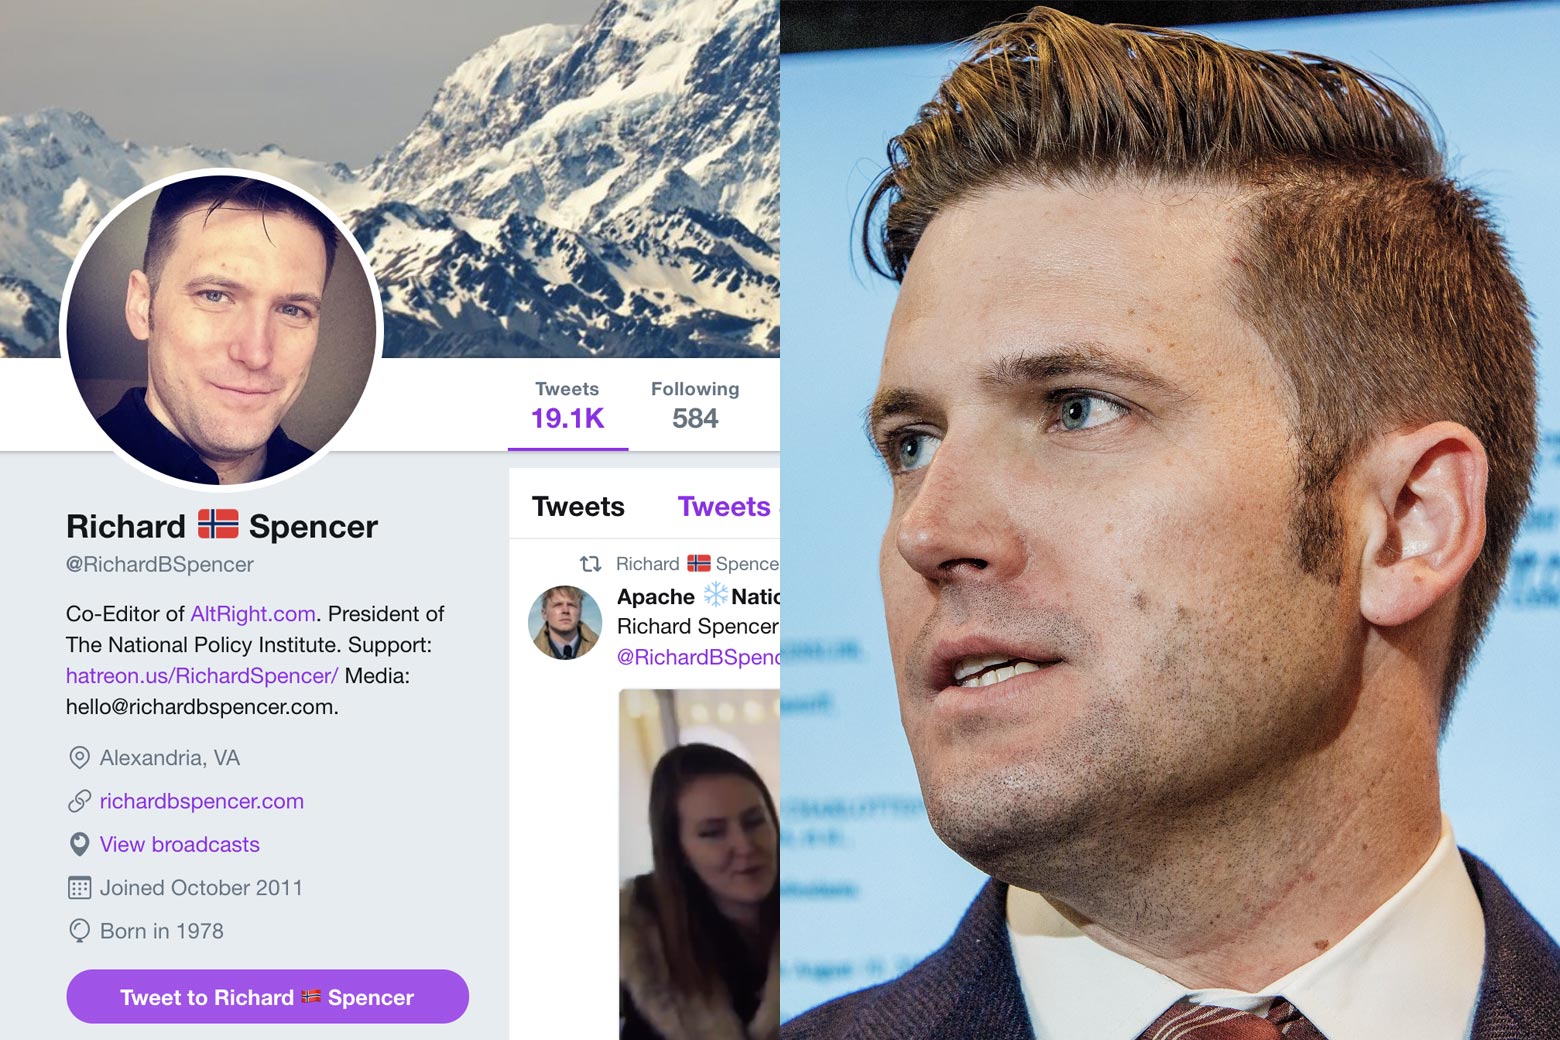 Richard Spencer’s Twitter page and Richard Spencer.